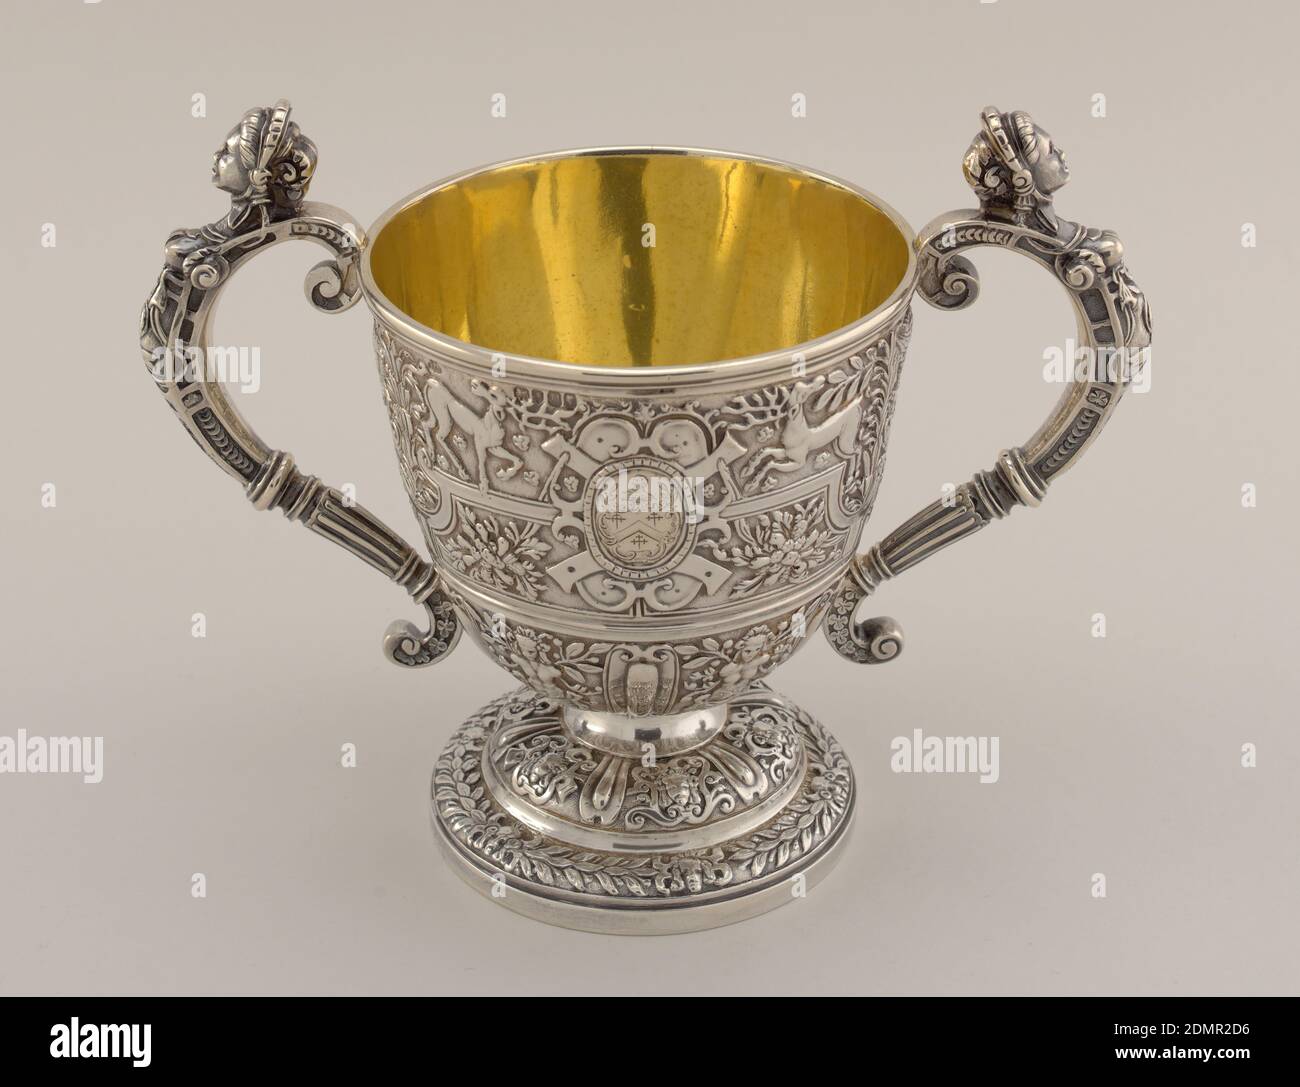 Two-handled cup, silver, 1855, metalwork, Decorative Arts, Two-handled cup Stock Photo